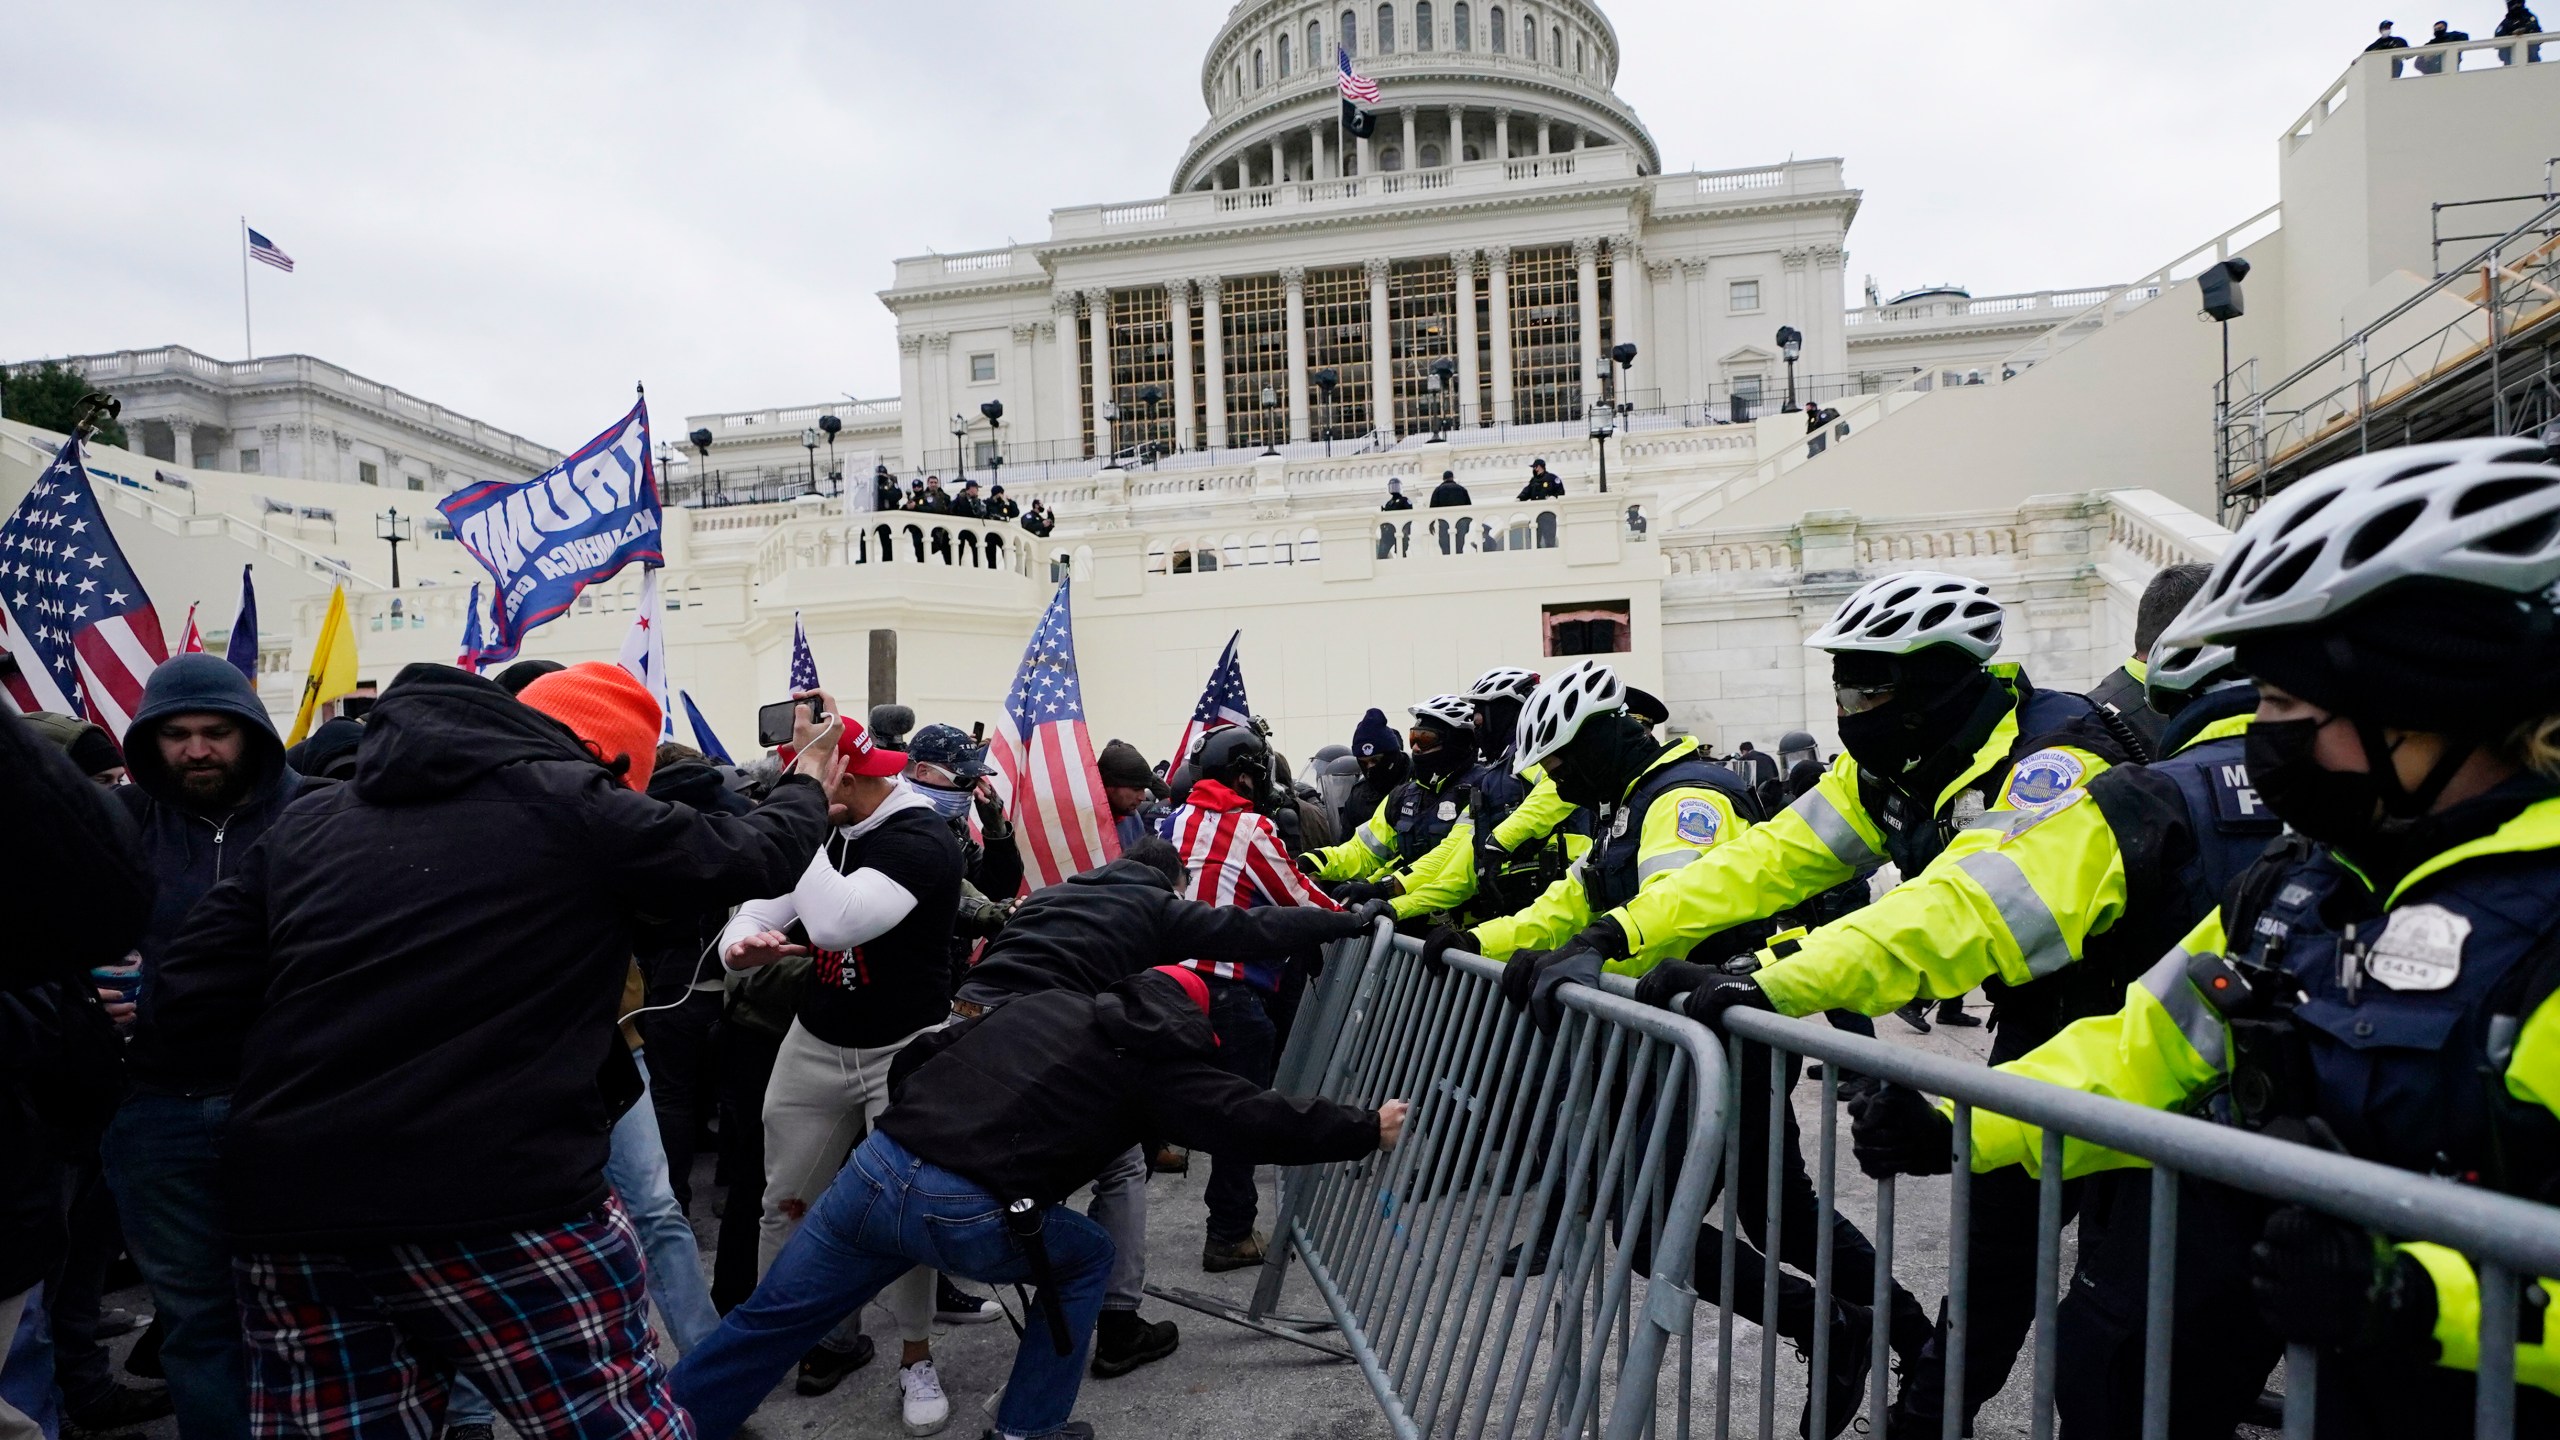 FILE - Rioters loyal to President Donald Trump push against a line of police at the U.S. Capitol in Washington on Jan. 6, 2021. House Republicans are aiming to undercut the Jan. 6 Committee's investigation with a new report that they say contradicts some of key testimony given to the panel. (AP Photo/Julio Cortez, File)